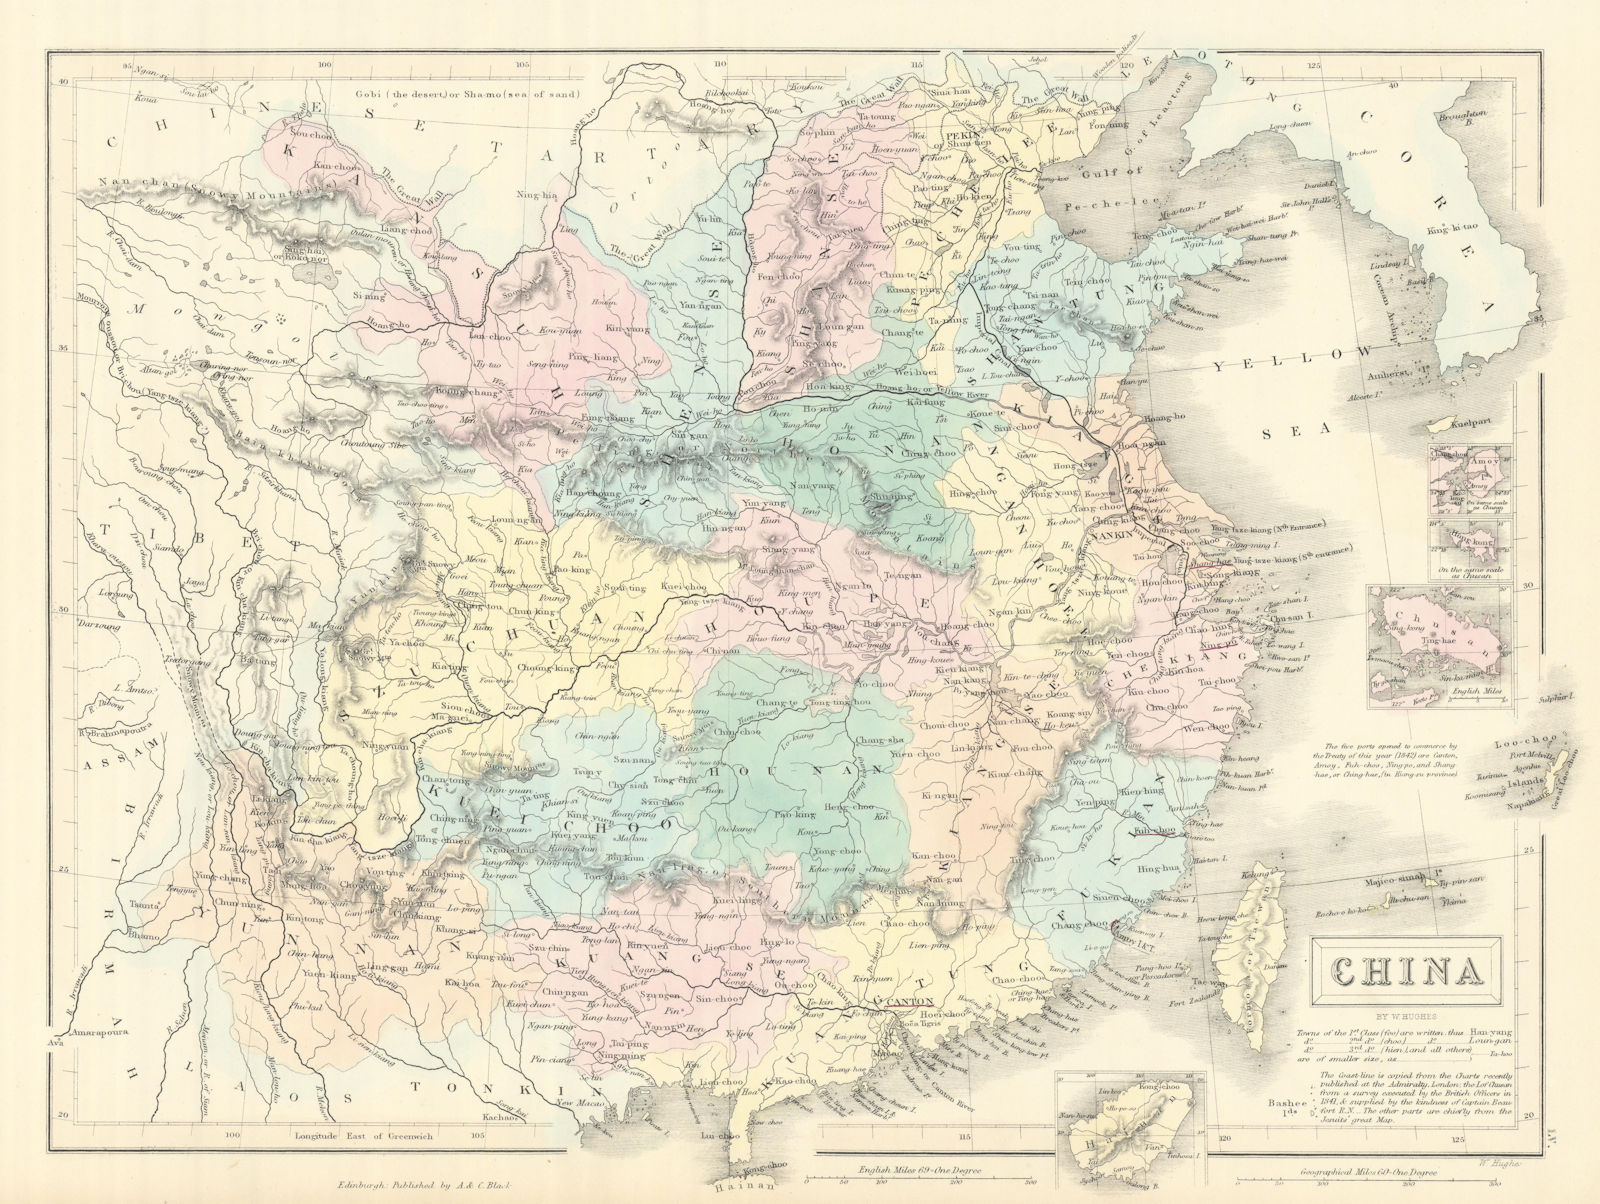 China showing provinces & Great Wall. 1842 Treaty Ports. WILLIAM HUGHES 1854 map